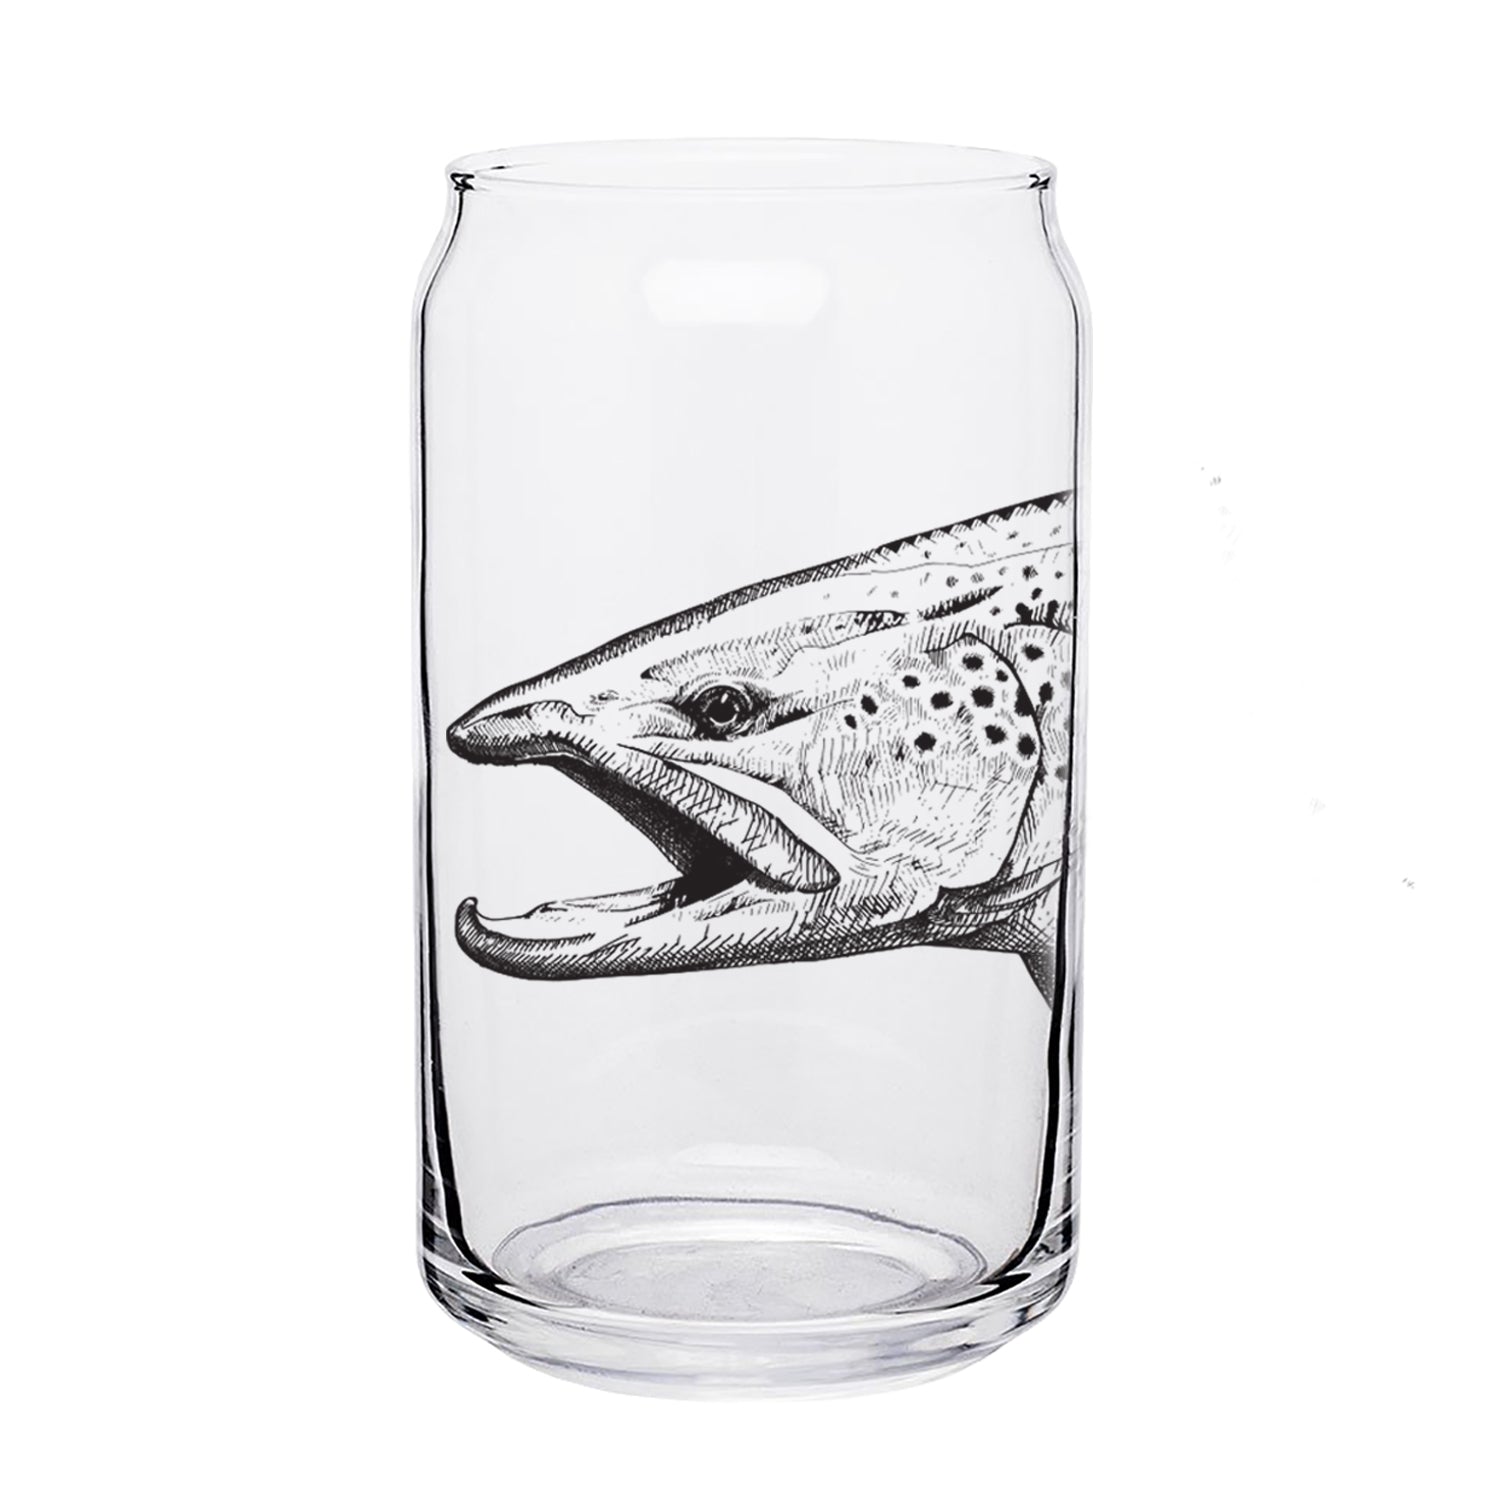 A clear glass shaped as beer can that features trout head design in black ink